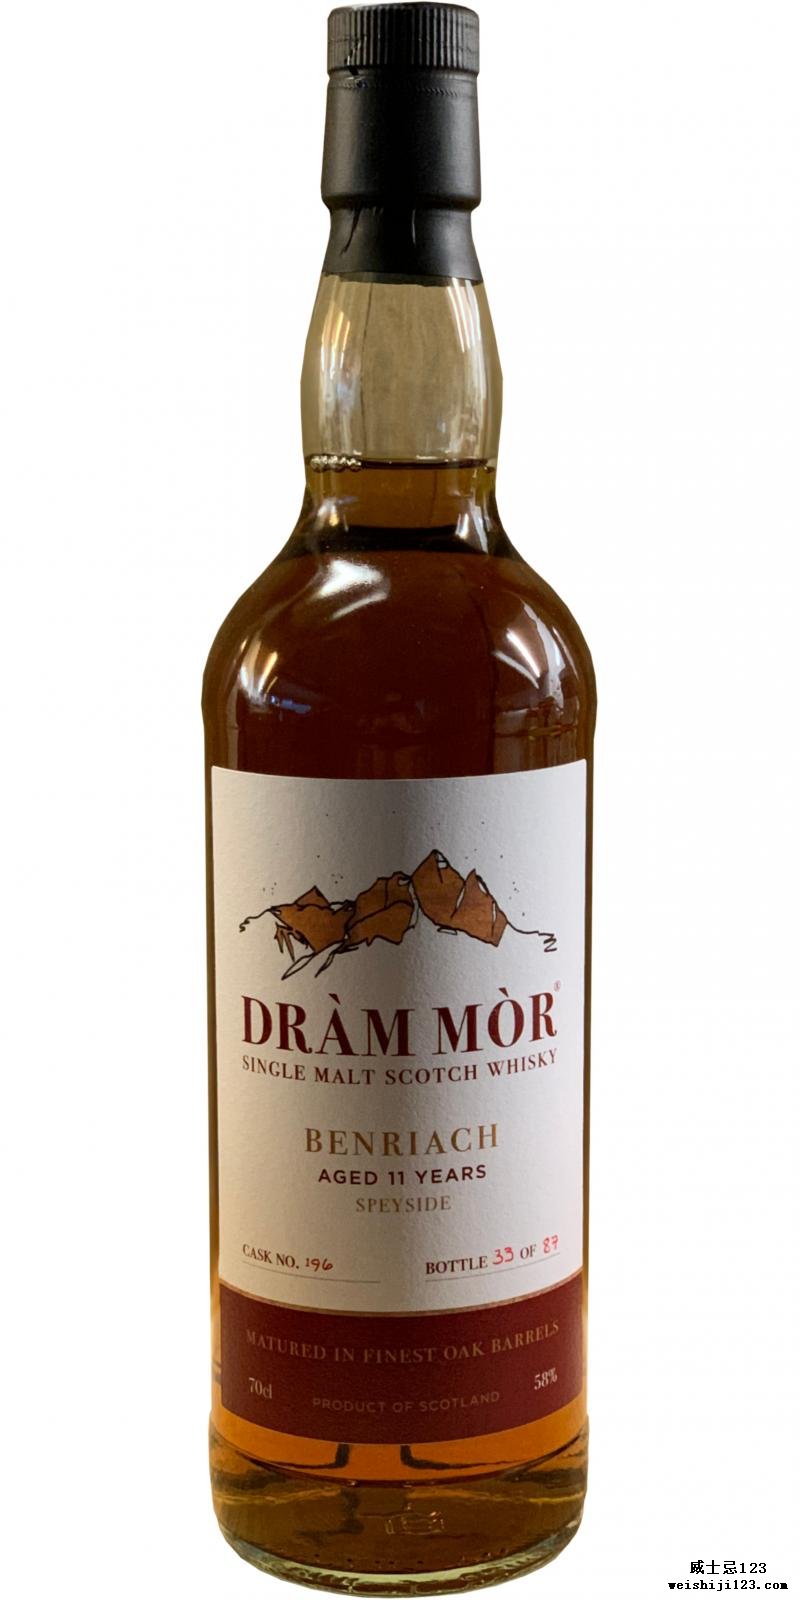 BenRiach 11-year-old DMor